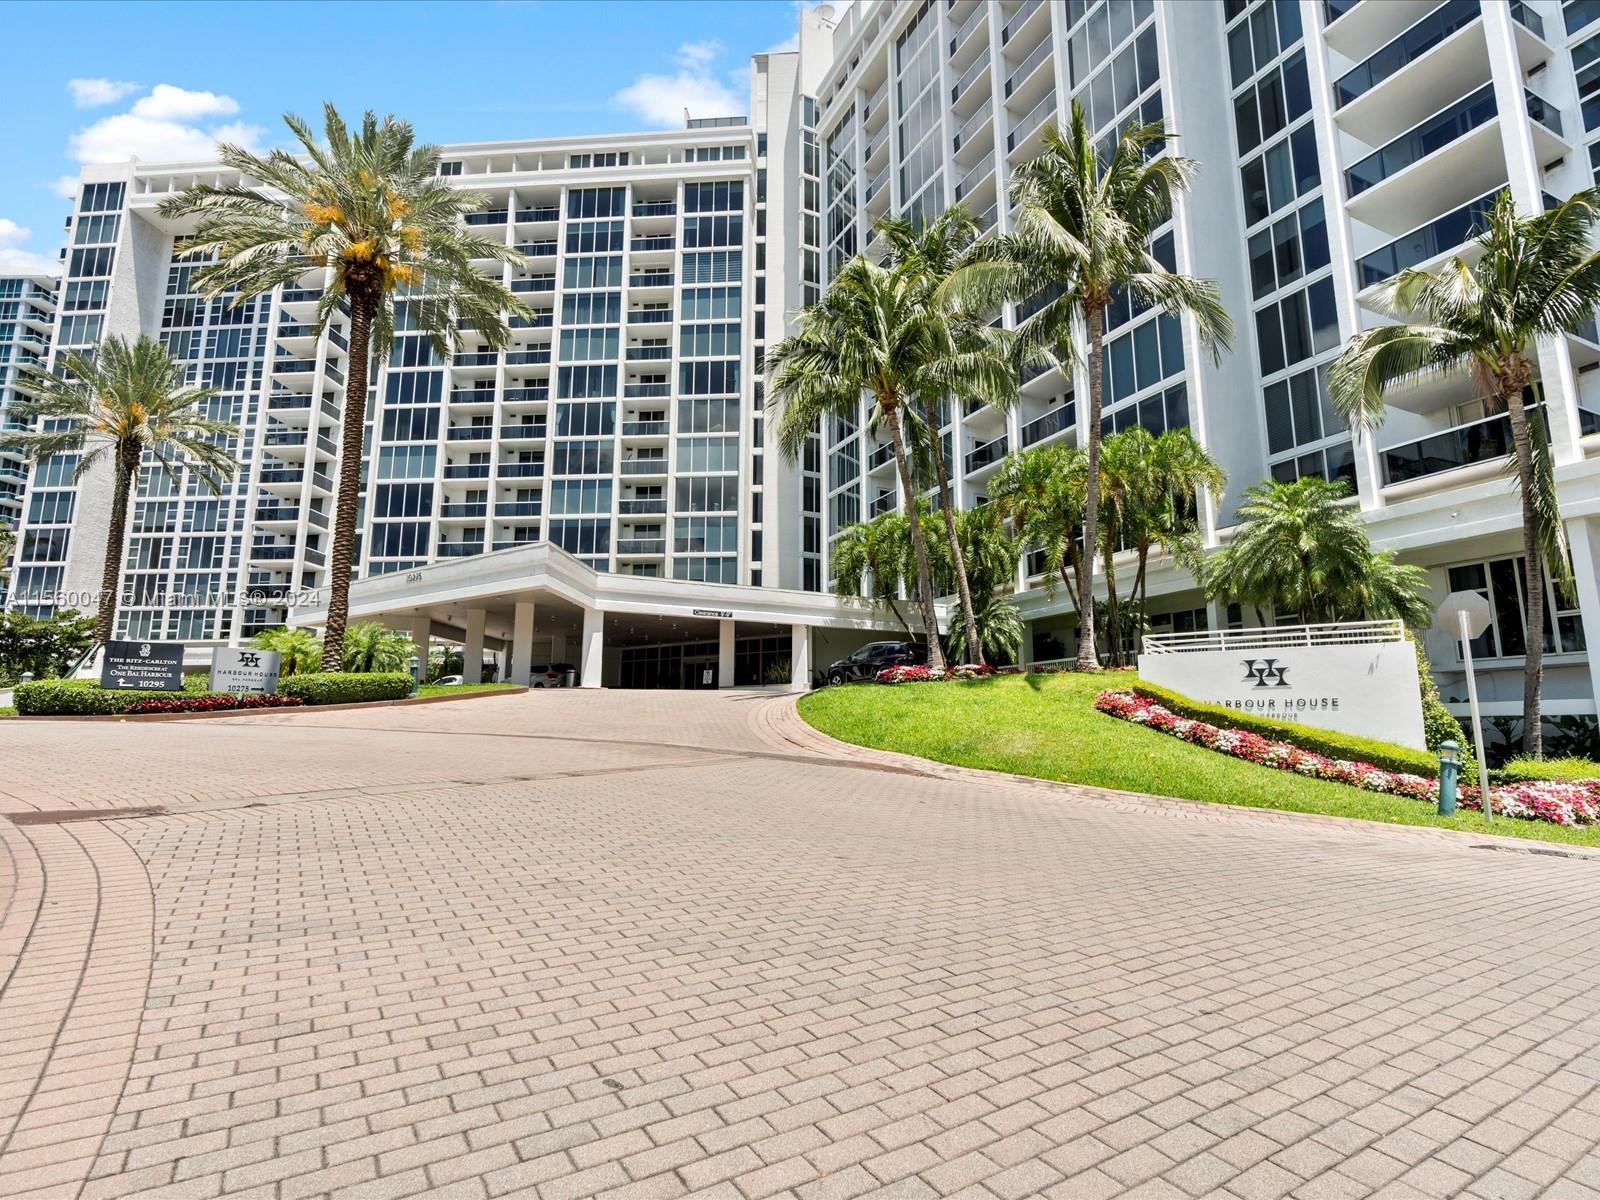 Stunning 1 bedroom 1.5 bathroom in the Harbour House. Spacious and open, this condo is flooded with natural light and beautiful Intracoastal views. The unit comes complete with an open kitchen, wood floors, floor-to-ceiling windows, custom closet systems and so much more. Harbour House is a full-service building with resort amenities including a state-of-the-art gym, pool with cabanas, beach service, and cafe.